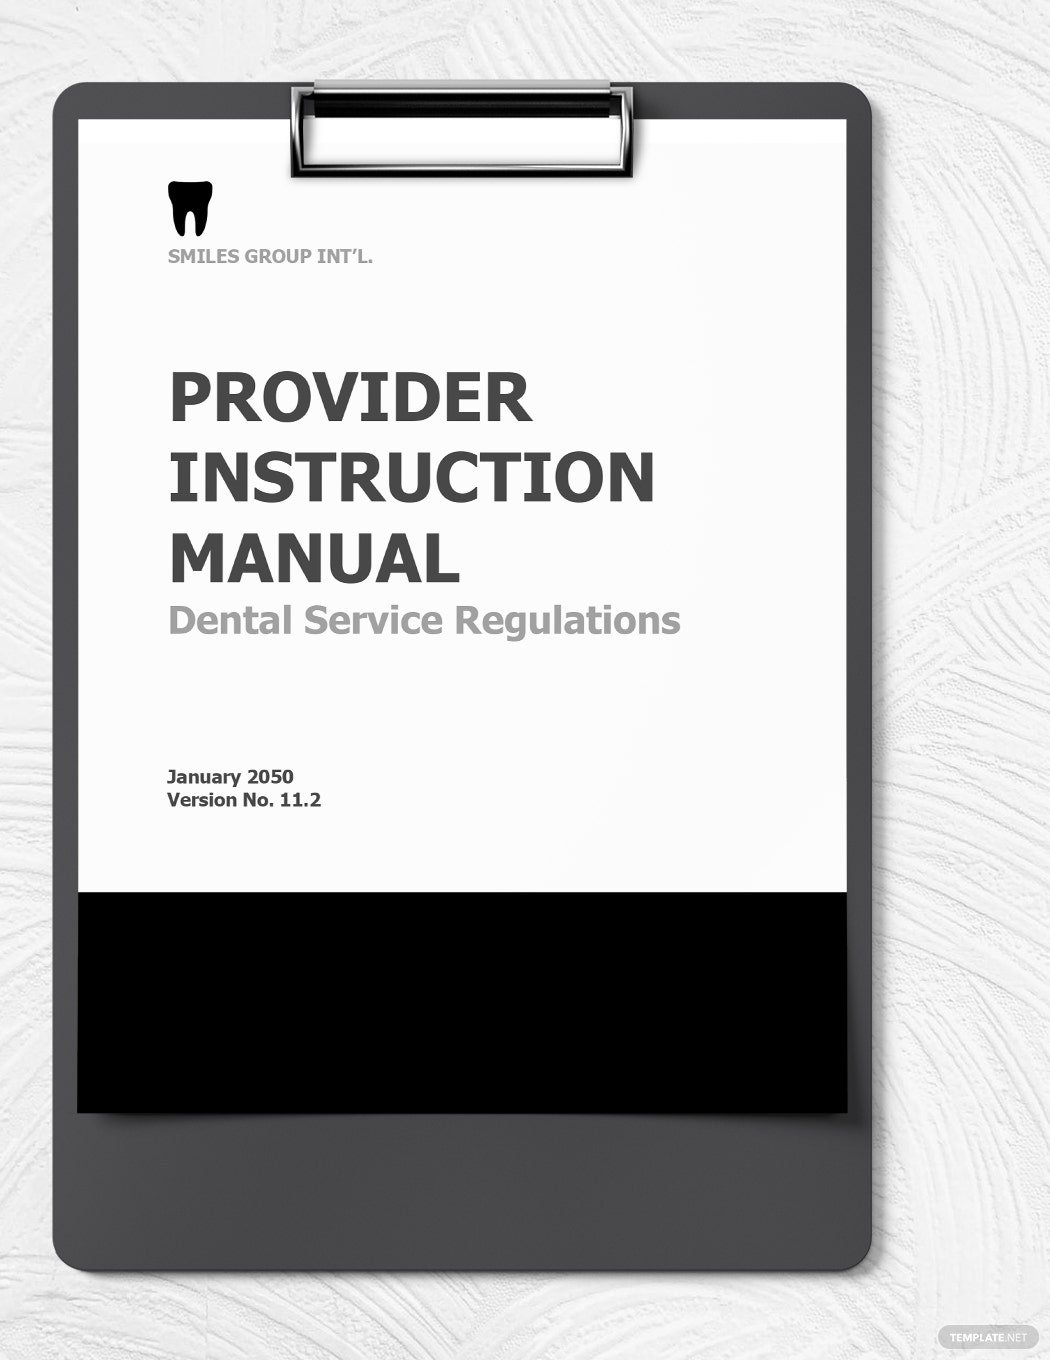 provider-instruction-manual-ideas-and-examples